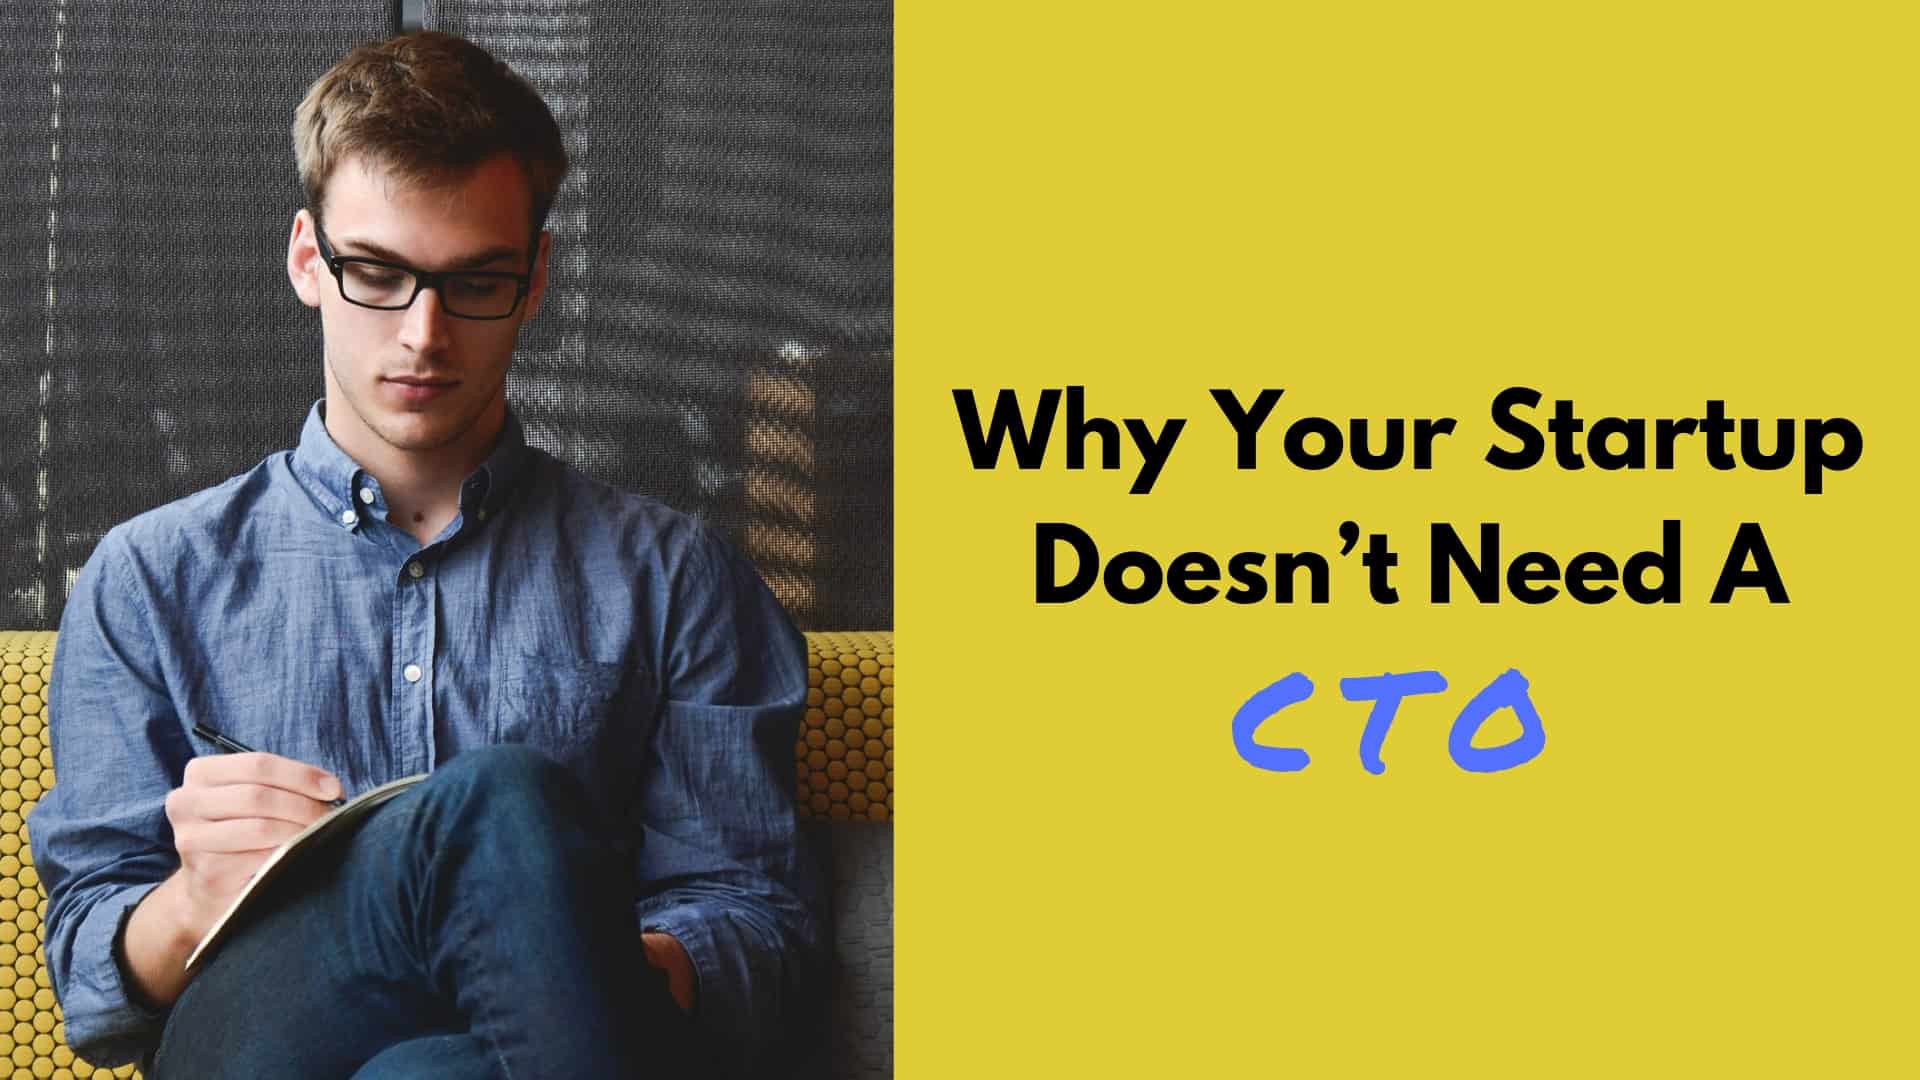 Why Your Startup Doesn’t Need A CTO